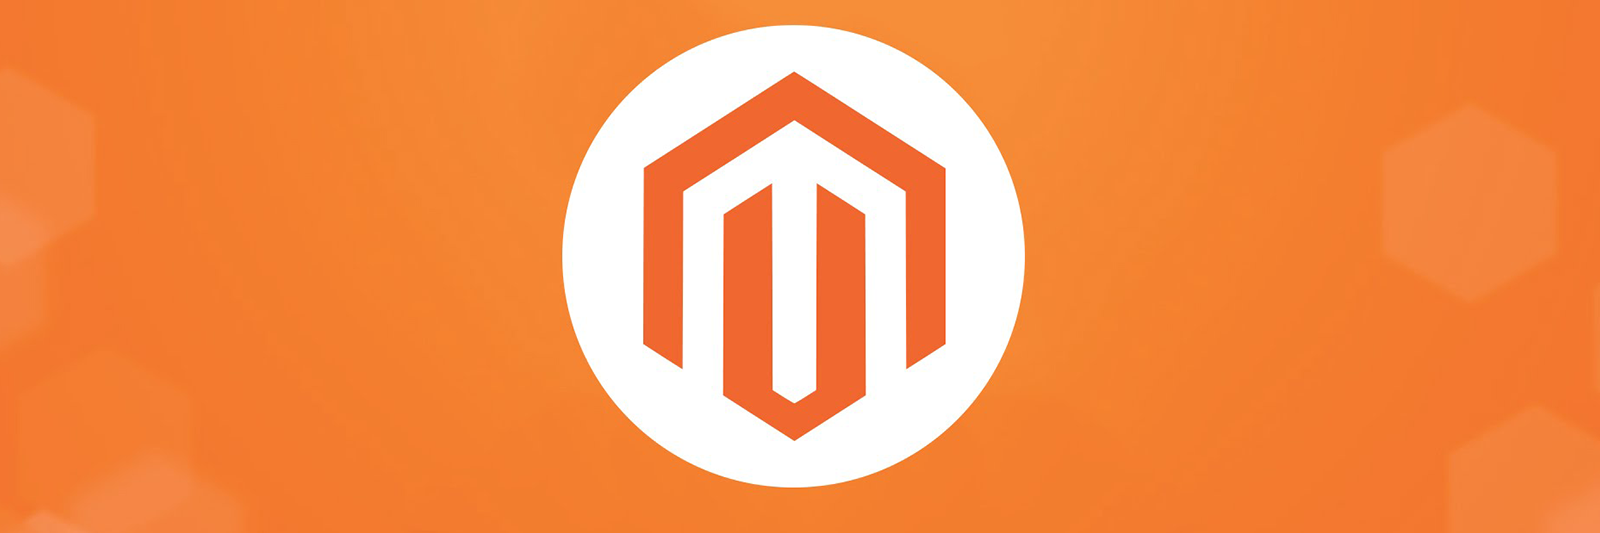 HOW TO FIX MAGENTO LINK ISSUE IN MANGENTO2